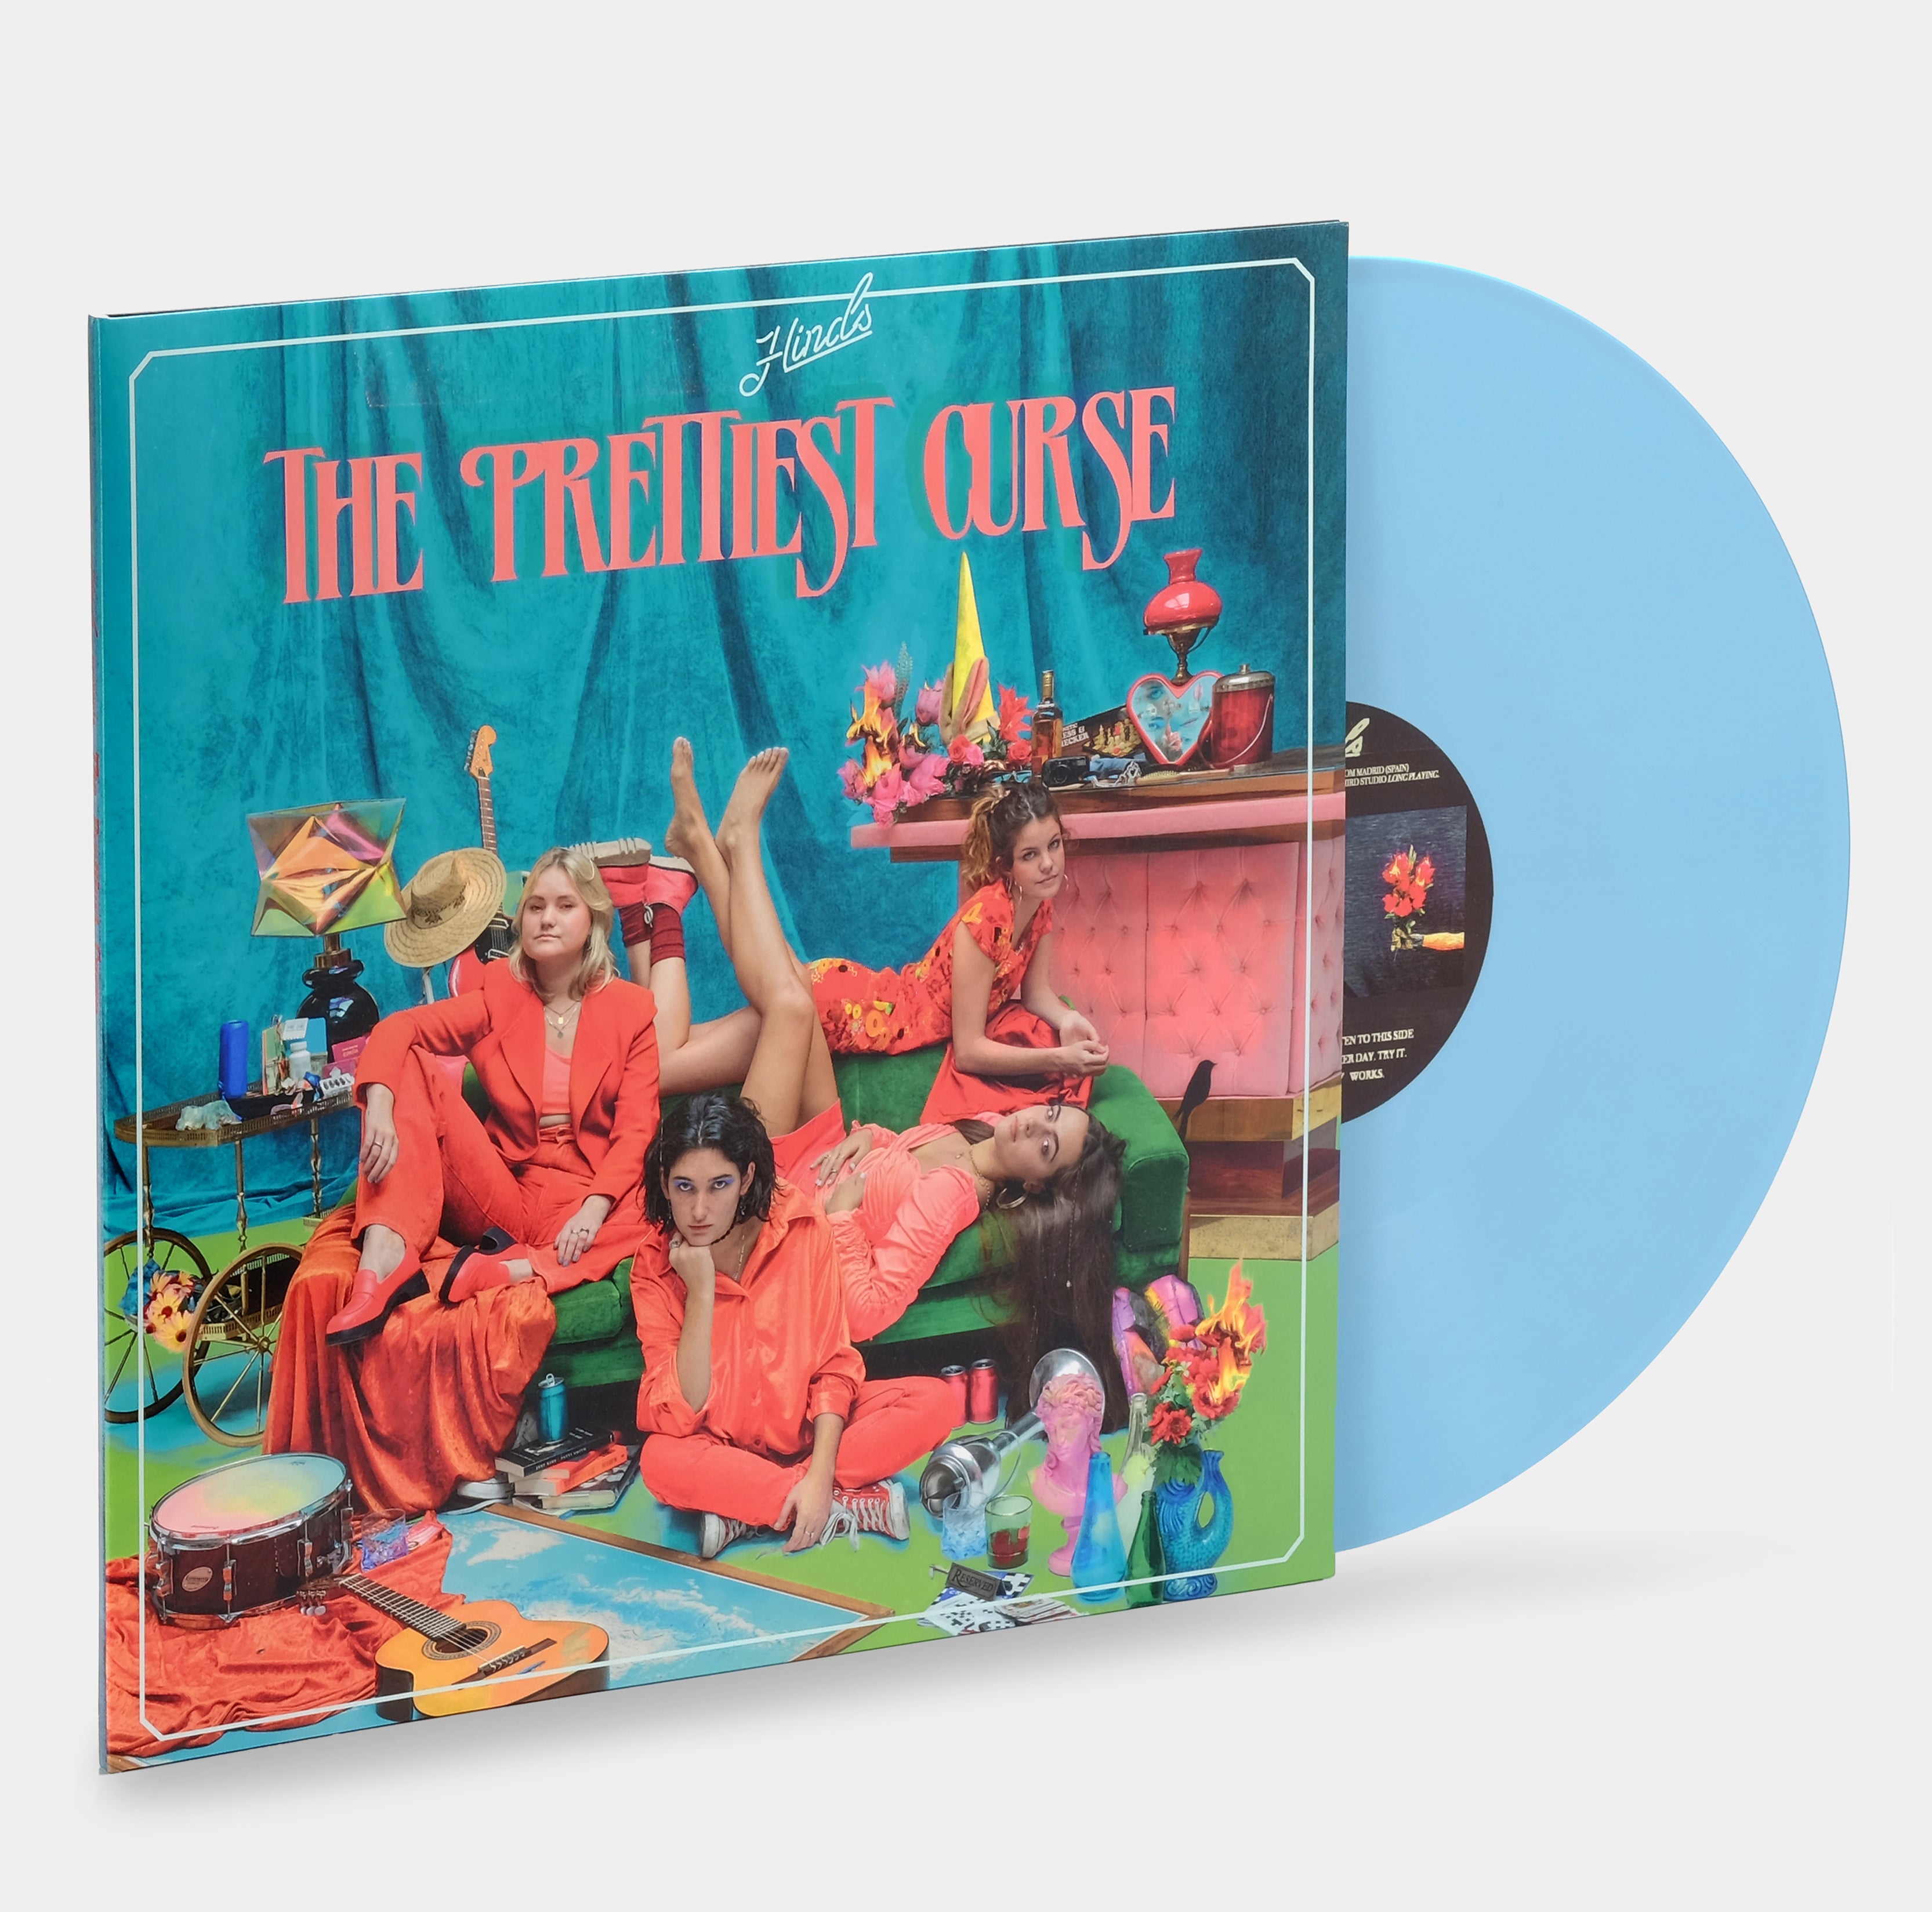 Hinds - The Prettiest Curse LP Baby Blue Vinyl Record